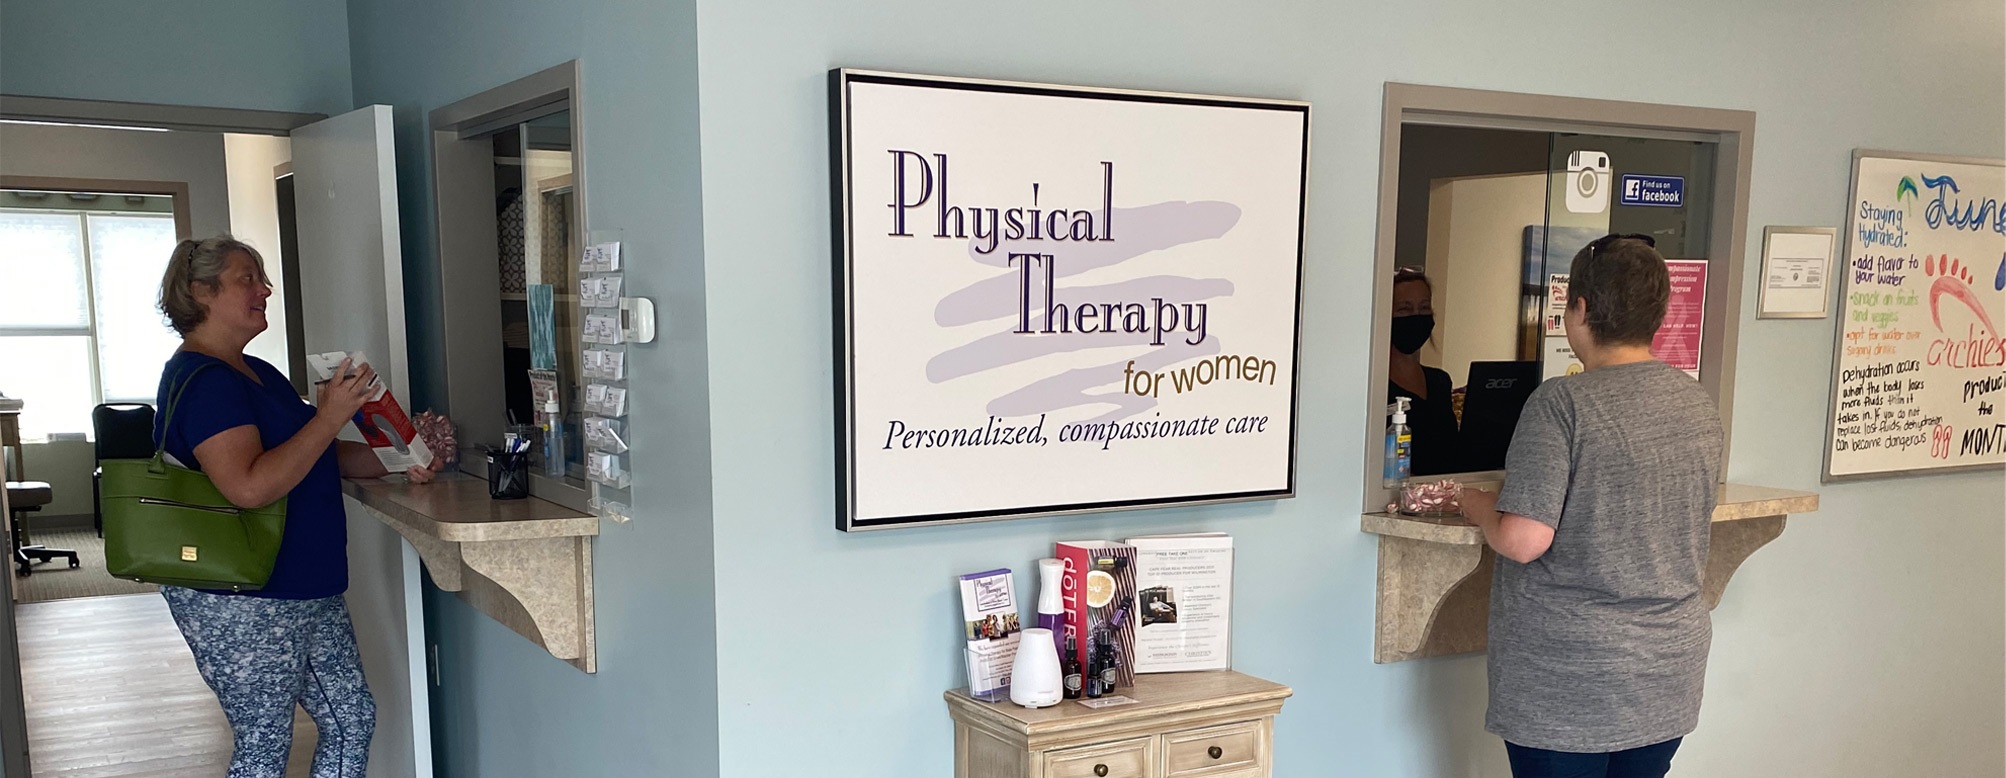 Physical Therapy for Women